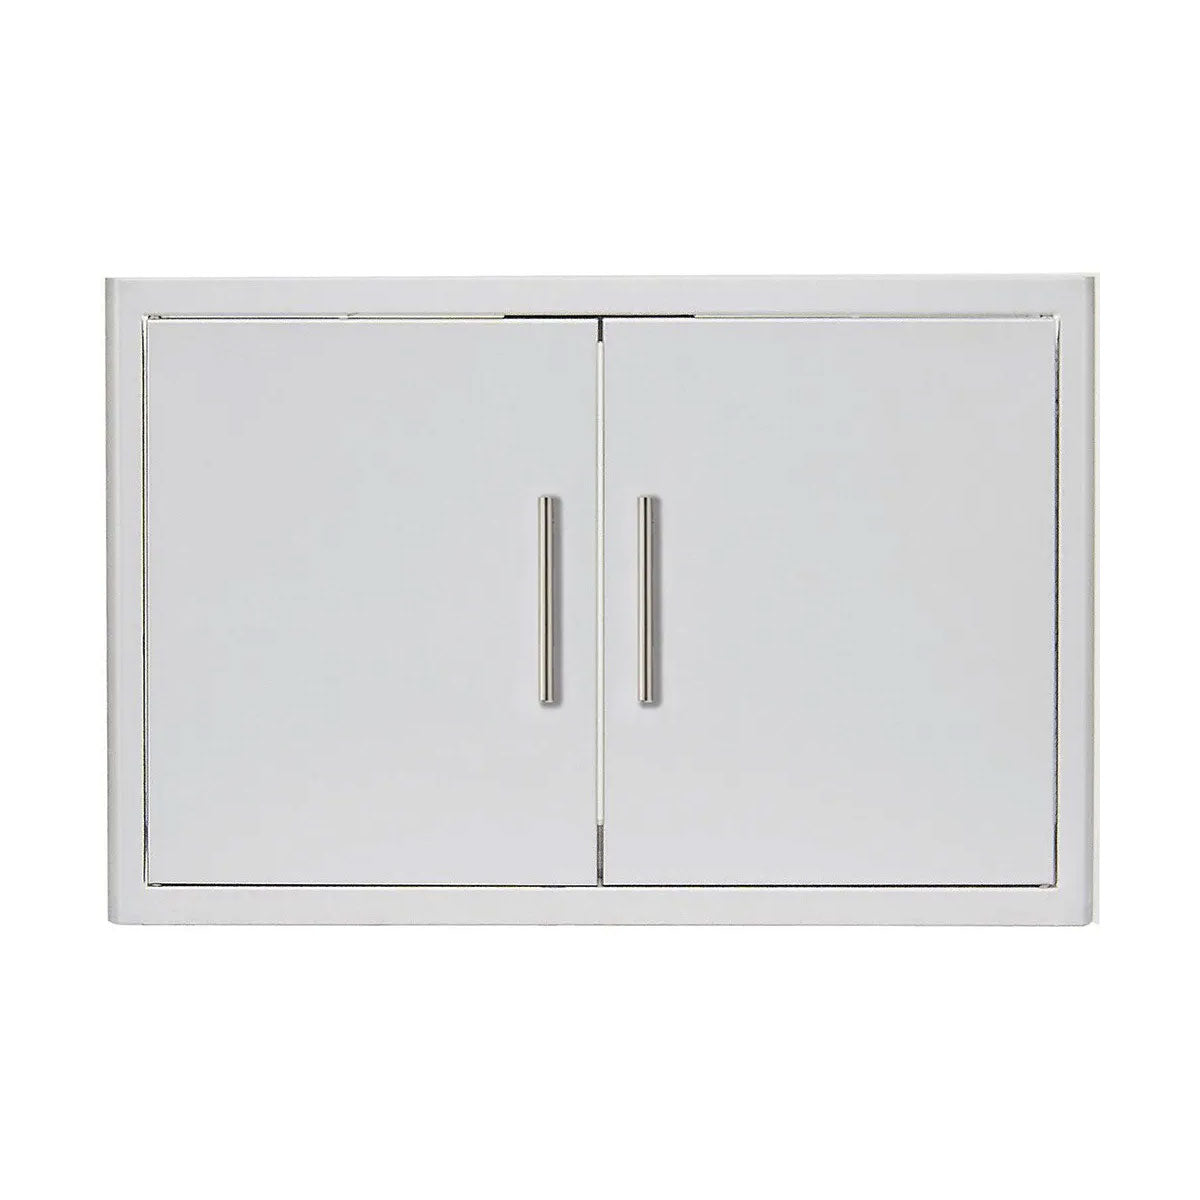 25" Double Access Door with Soft Close Hinges - BLZ-AD25-R-SC